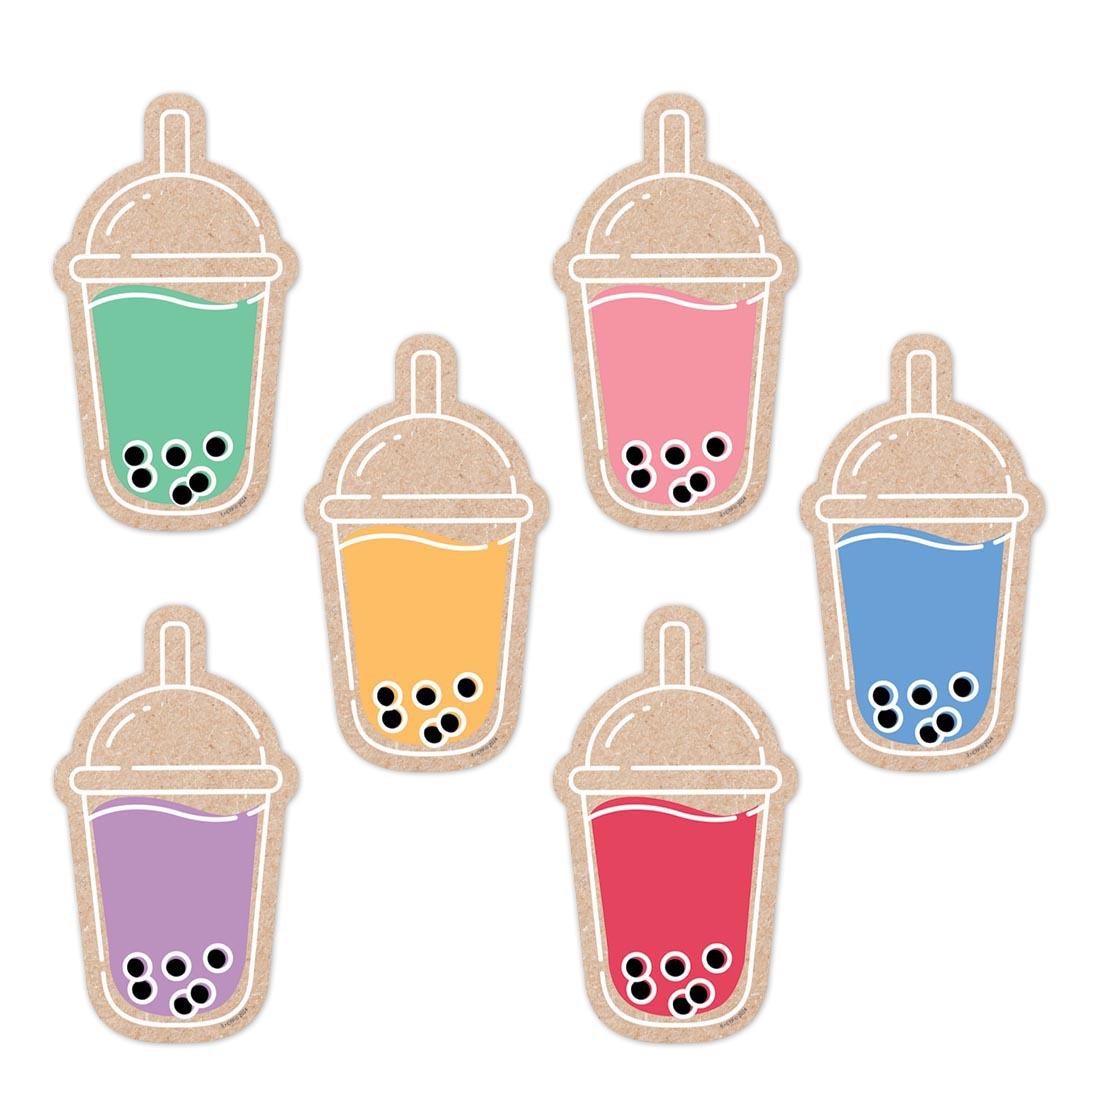 Six Boba Cups Designer Cut-Outs from the Krafty Pop collection by Creative Teaching Press